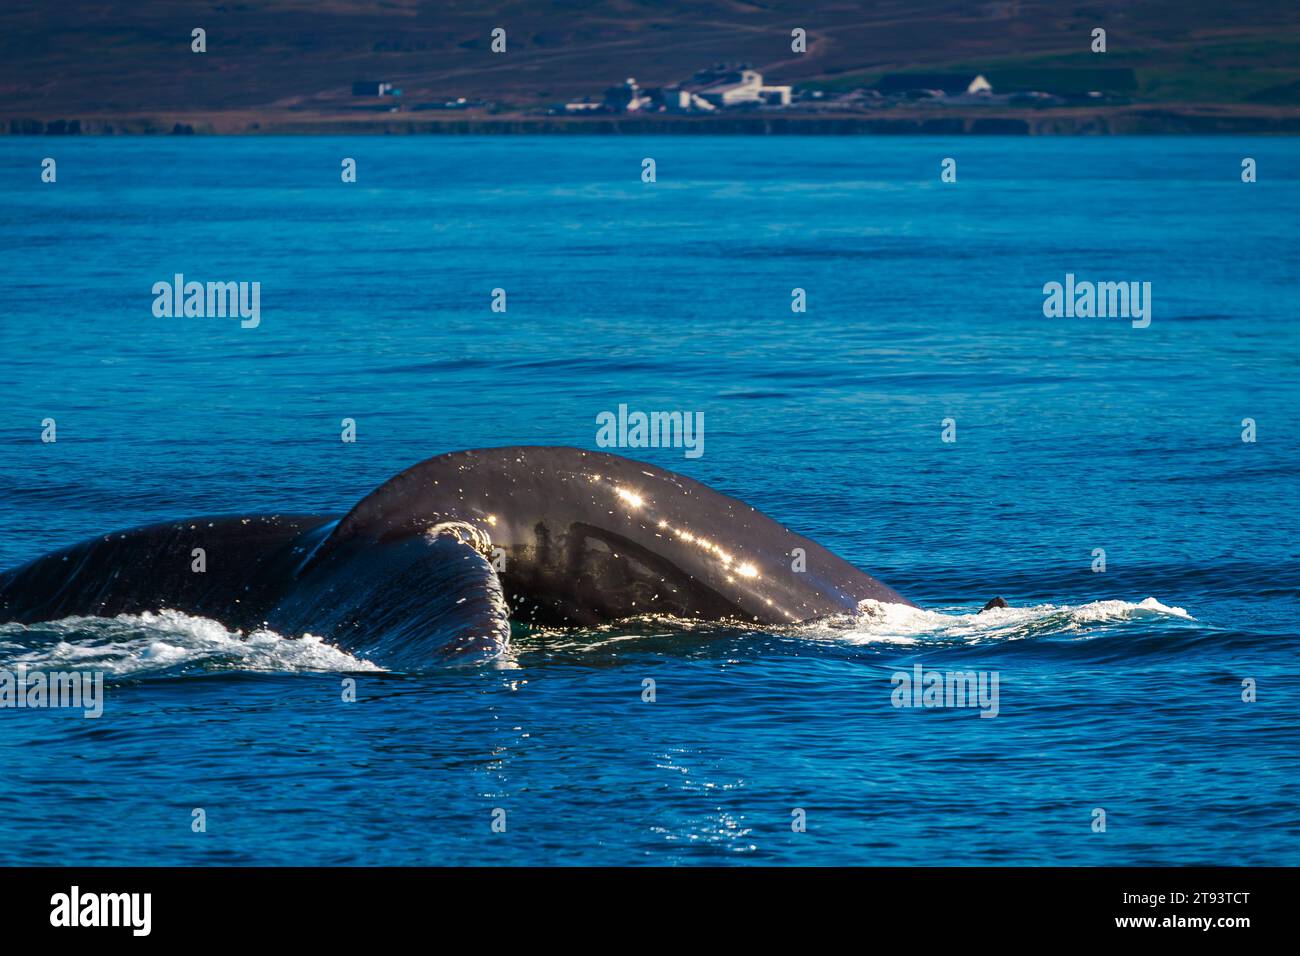 Close-up view of adult Hump Back Whale Tail Stock Photo